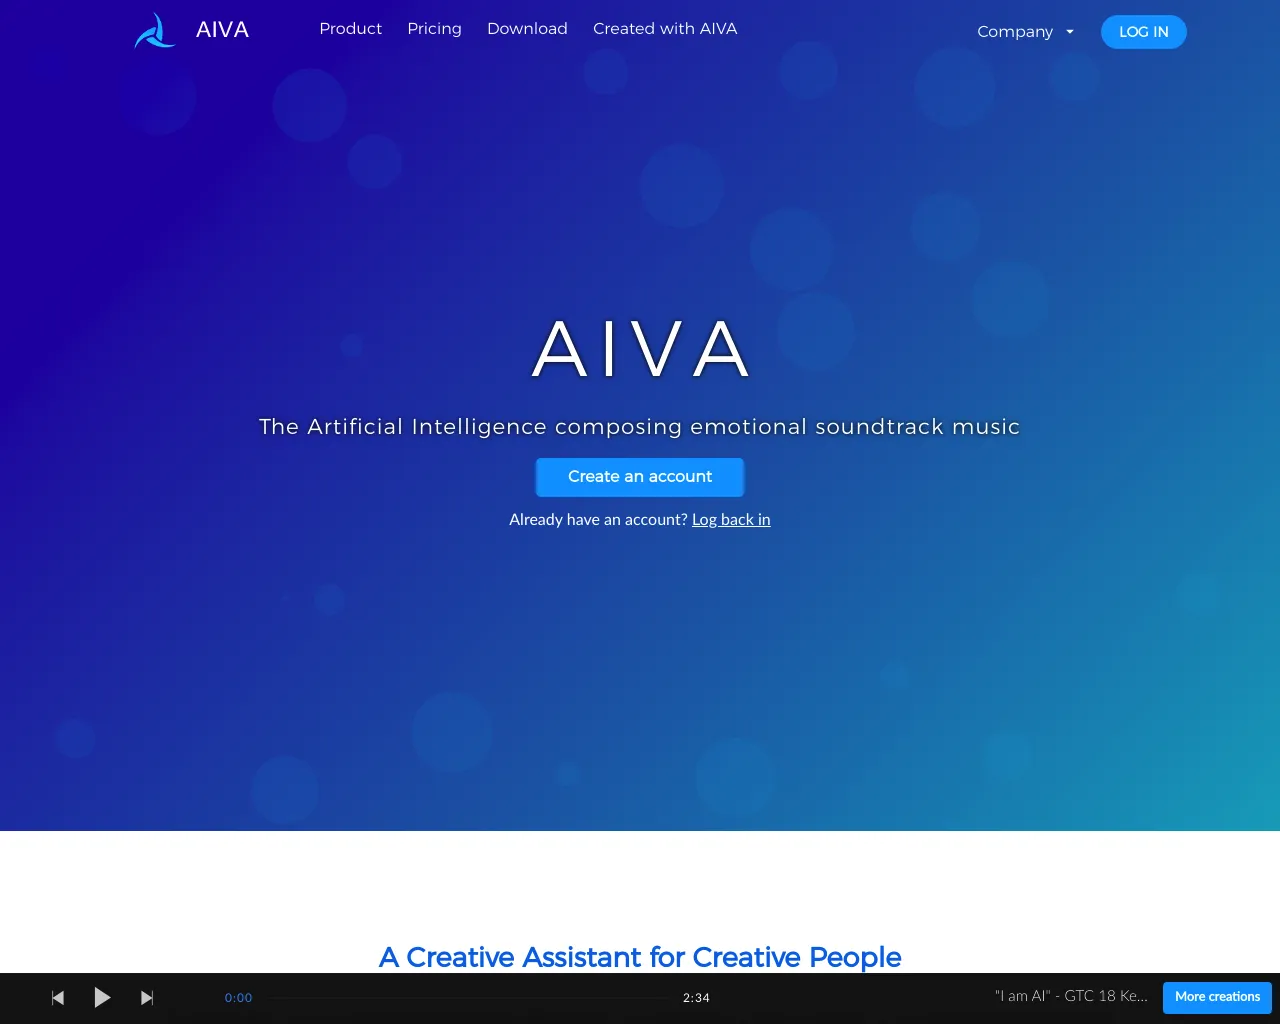 AIVA - The Artificial Intelligence composing emotional soundtrack music